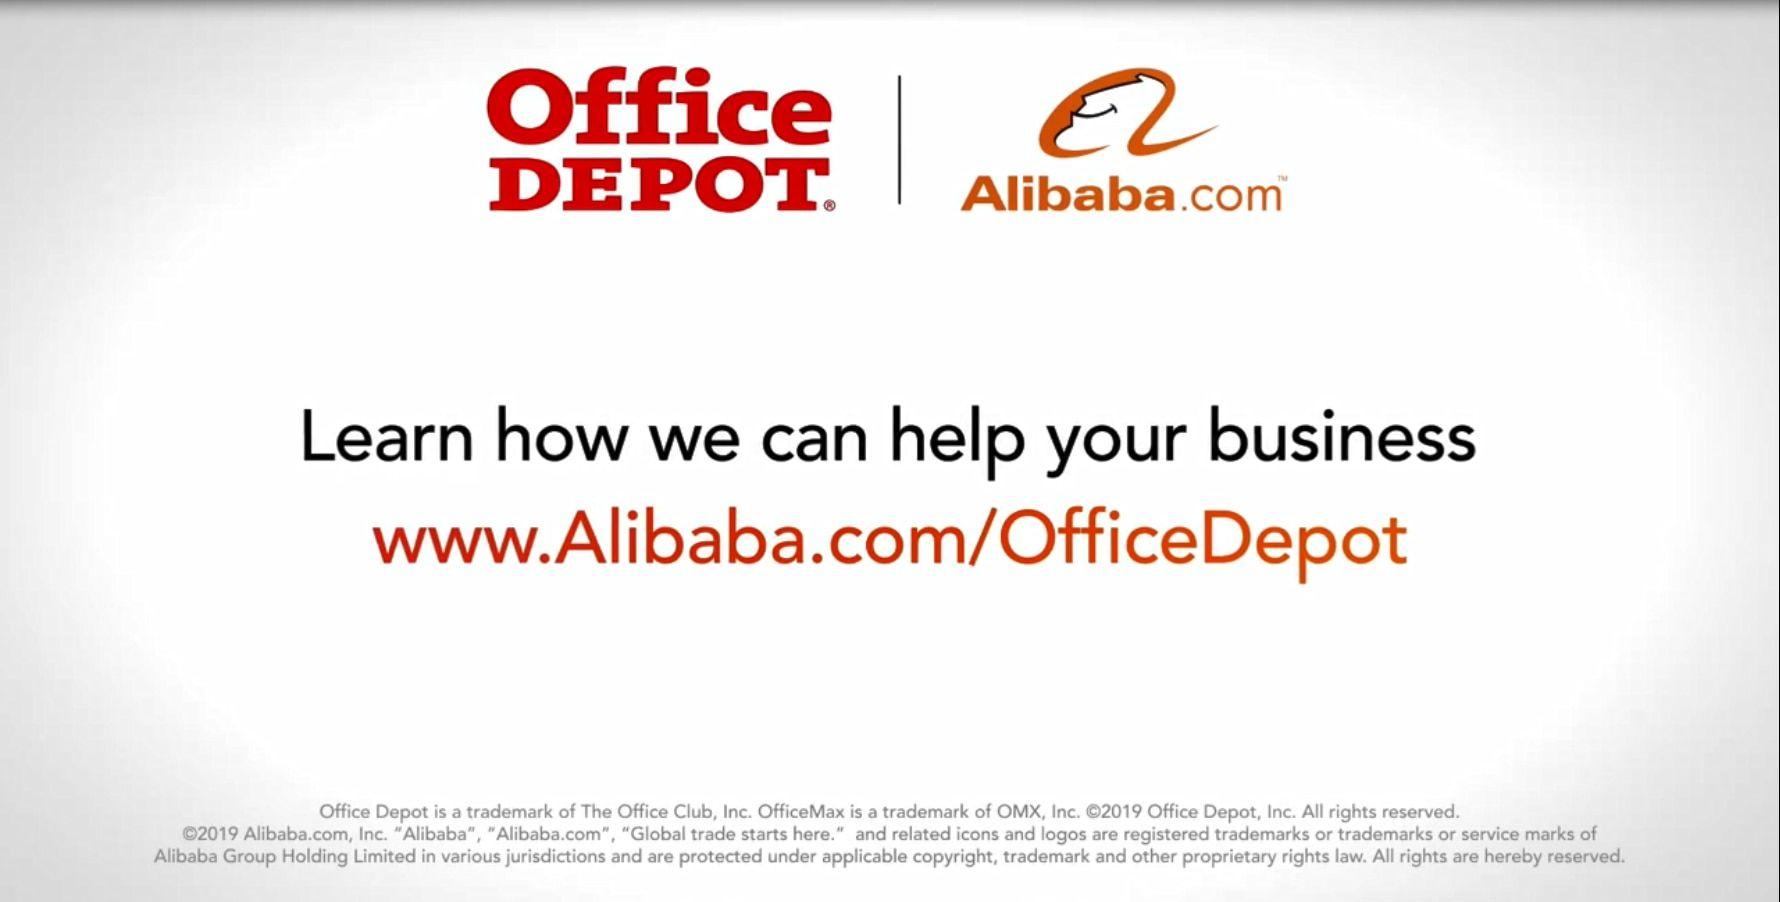 Officedepot.com Logo - How to Equip Your Business for Success with Office Depot and Alibaba